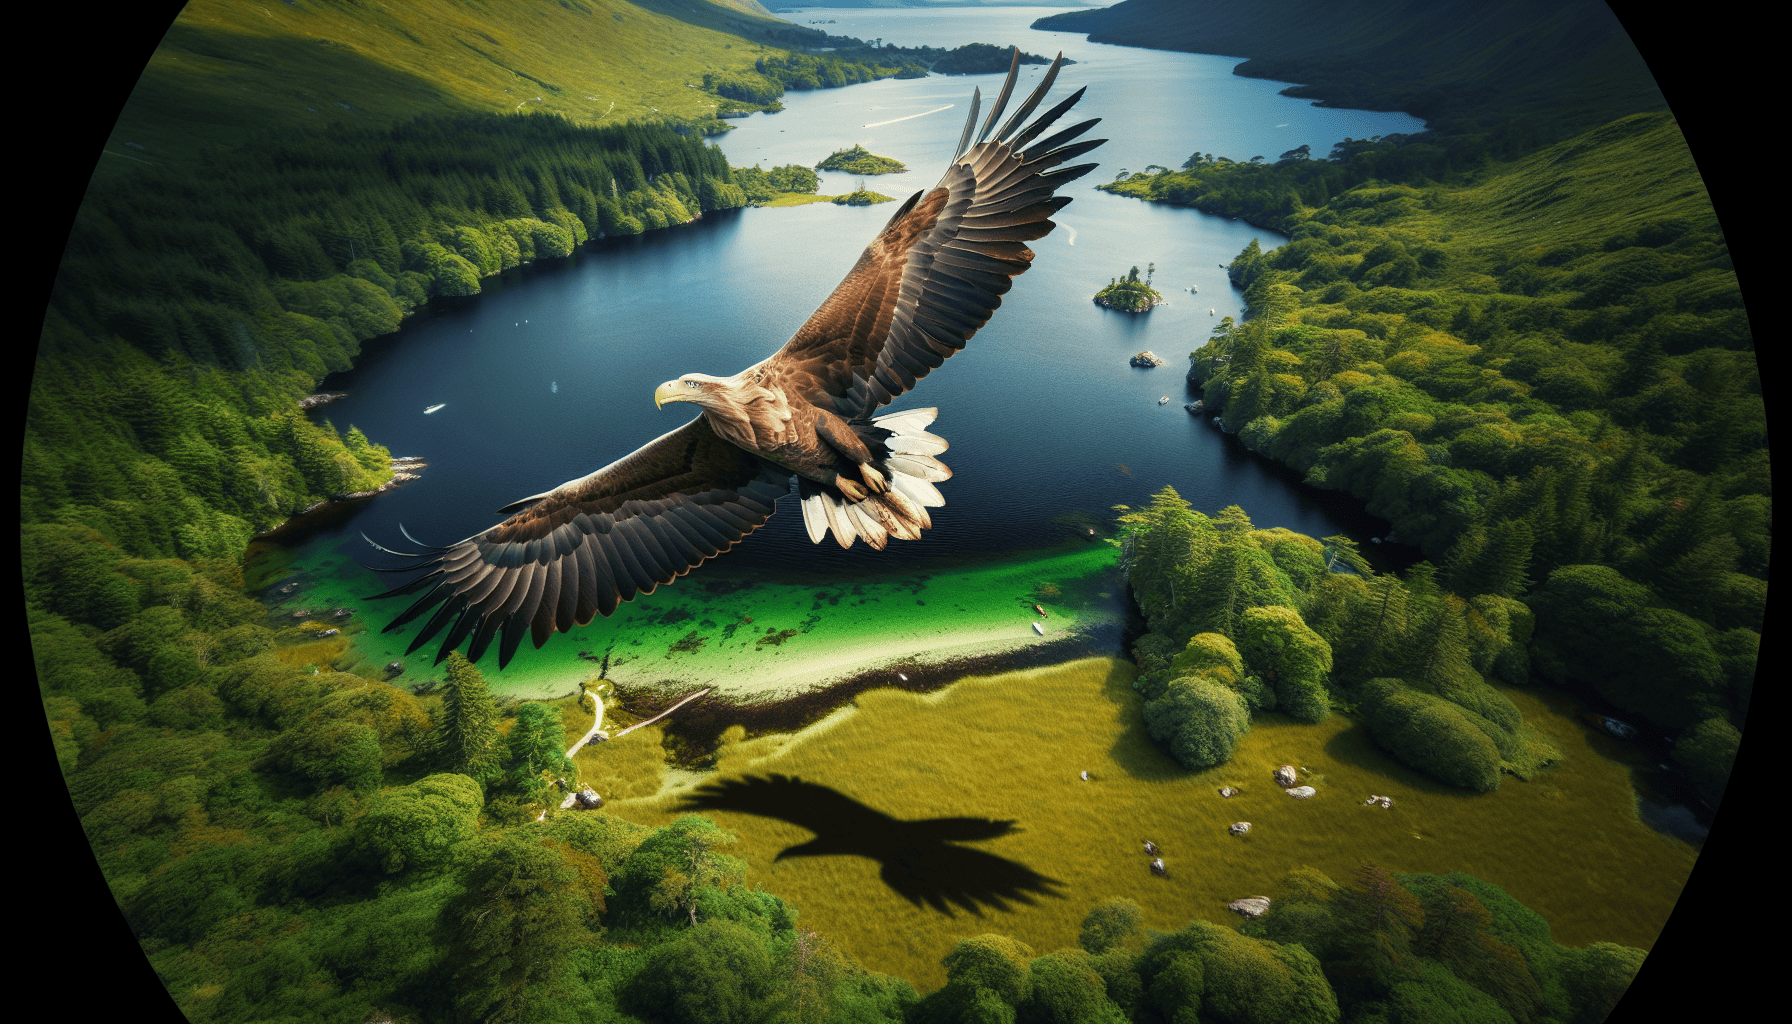 White tailed sea eagle soaring over the waters of Killarney National Park